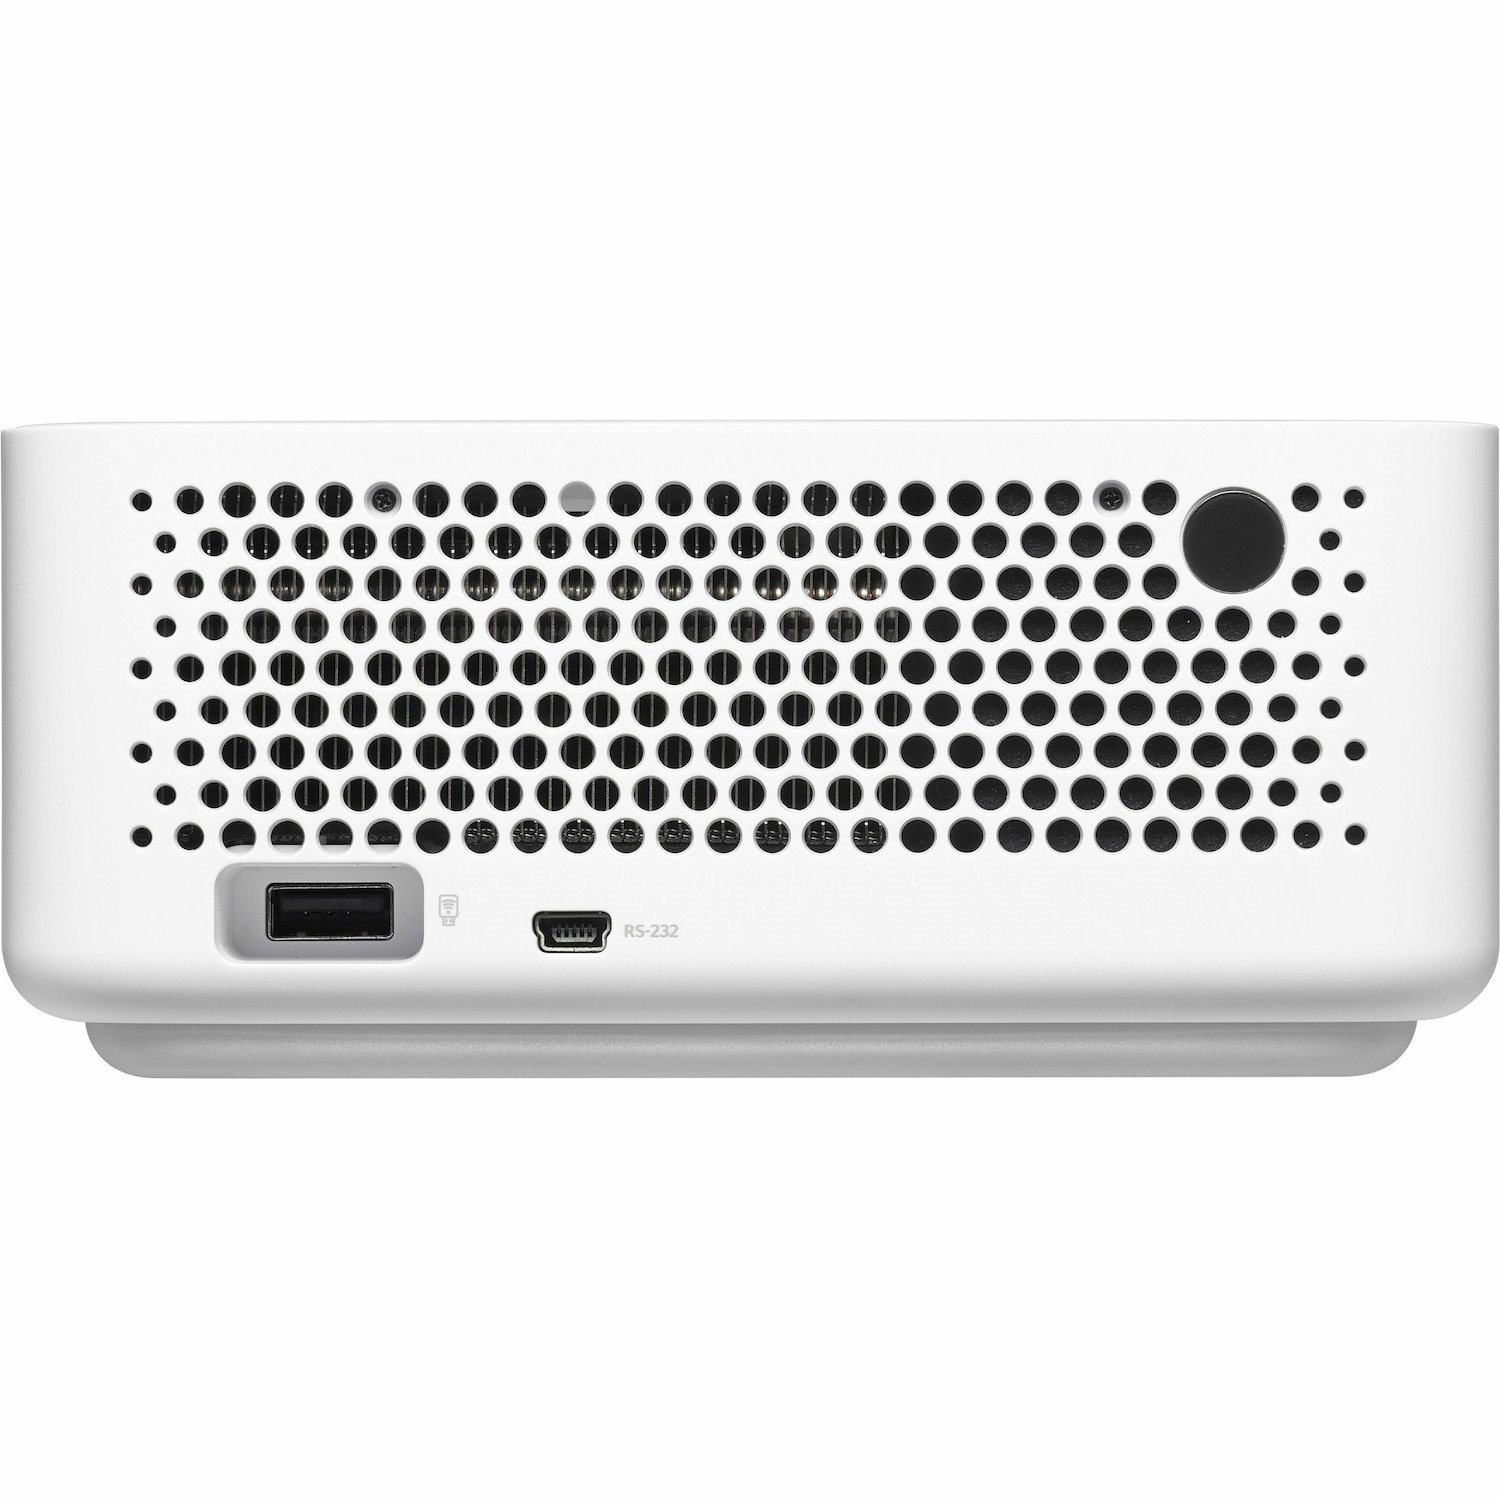 Optoma ML1080 DLP Projector - 16:9 - Portable - White